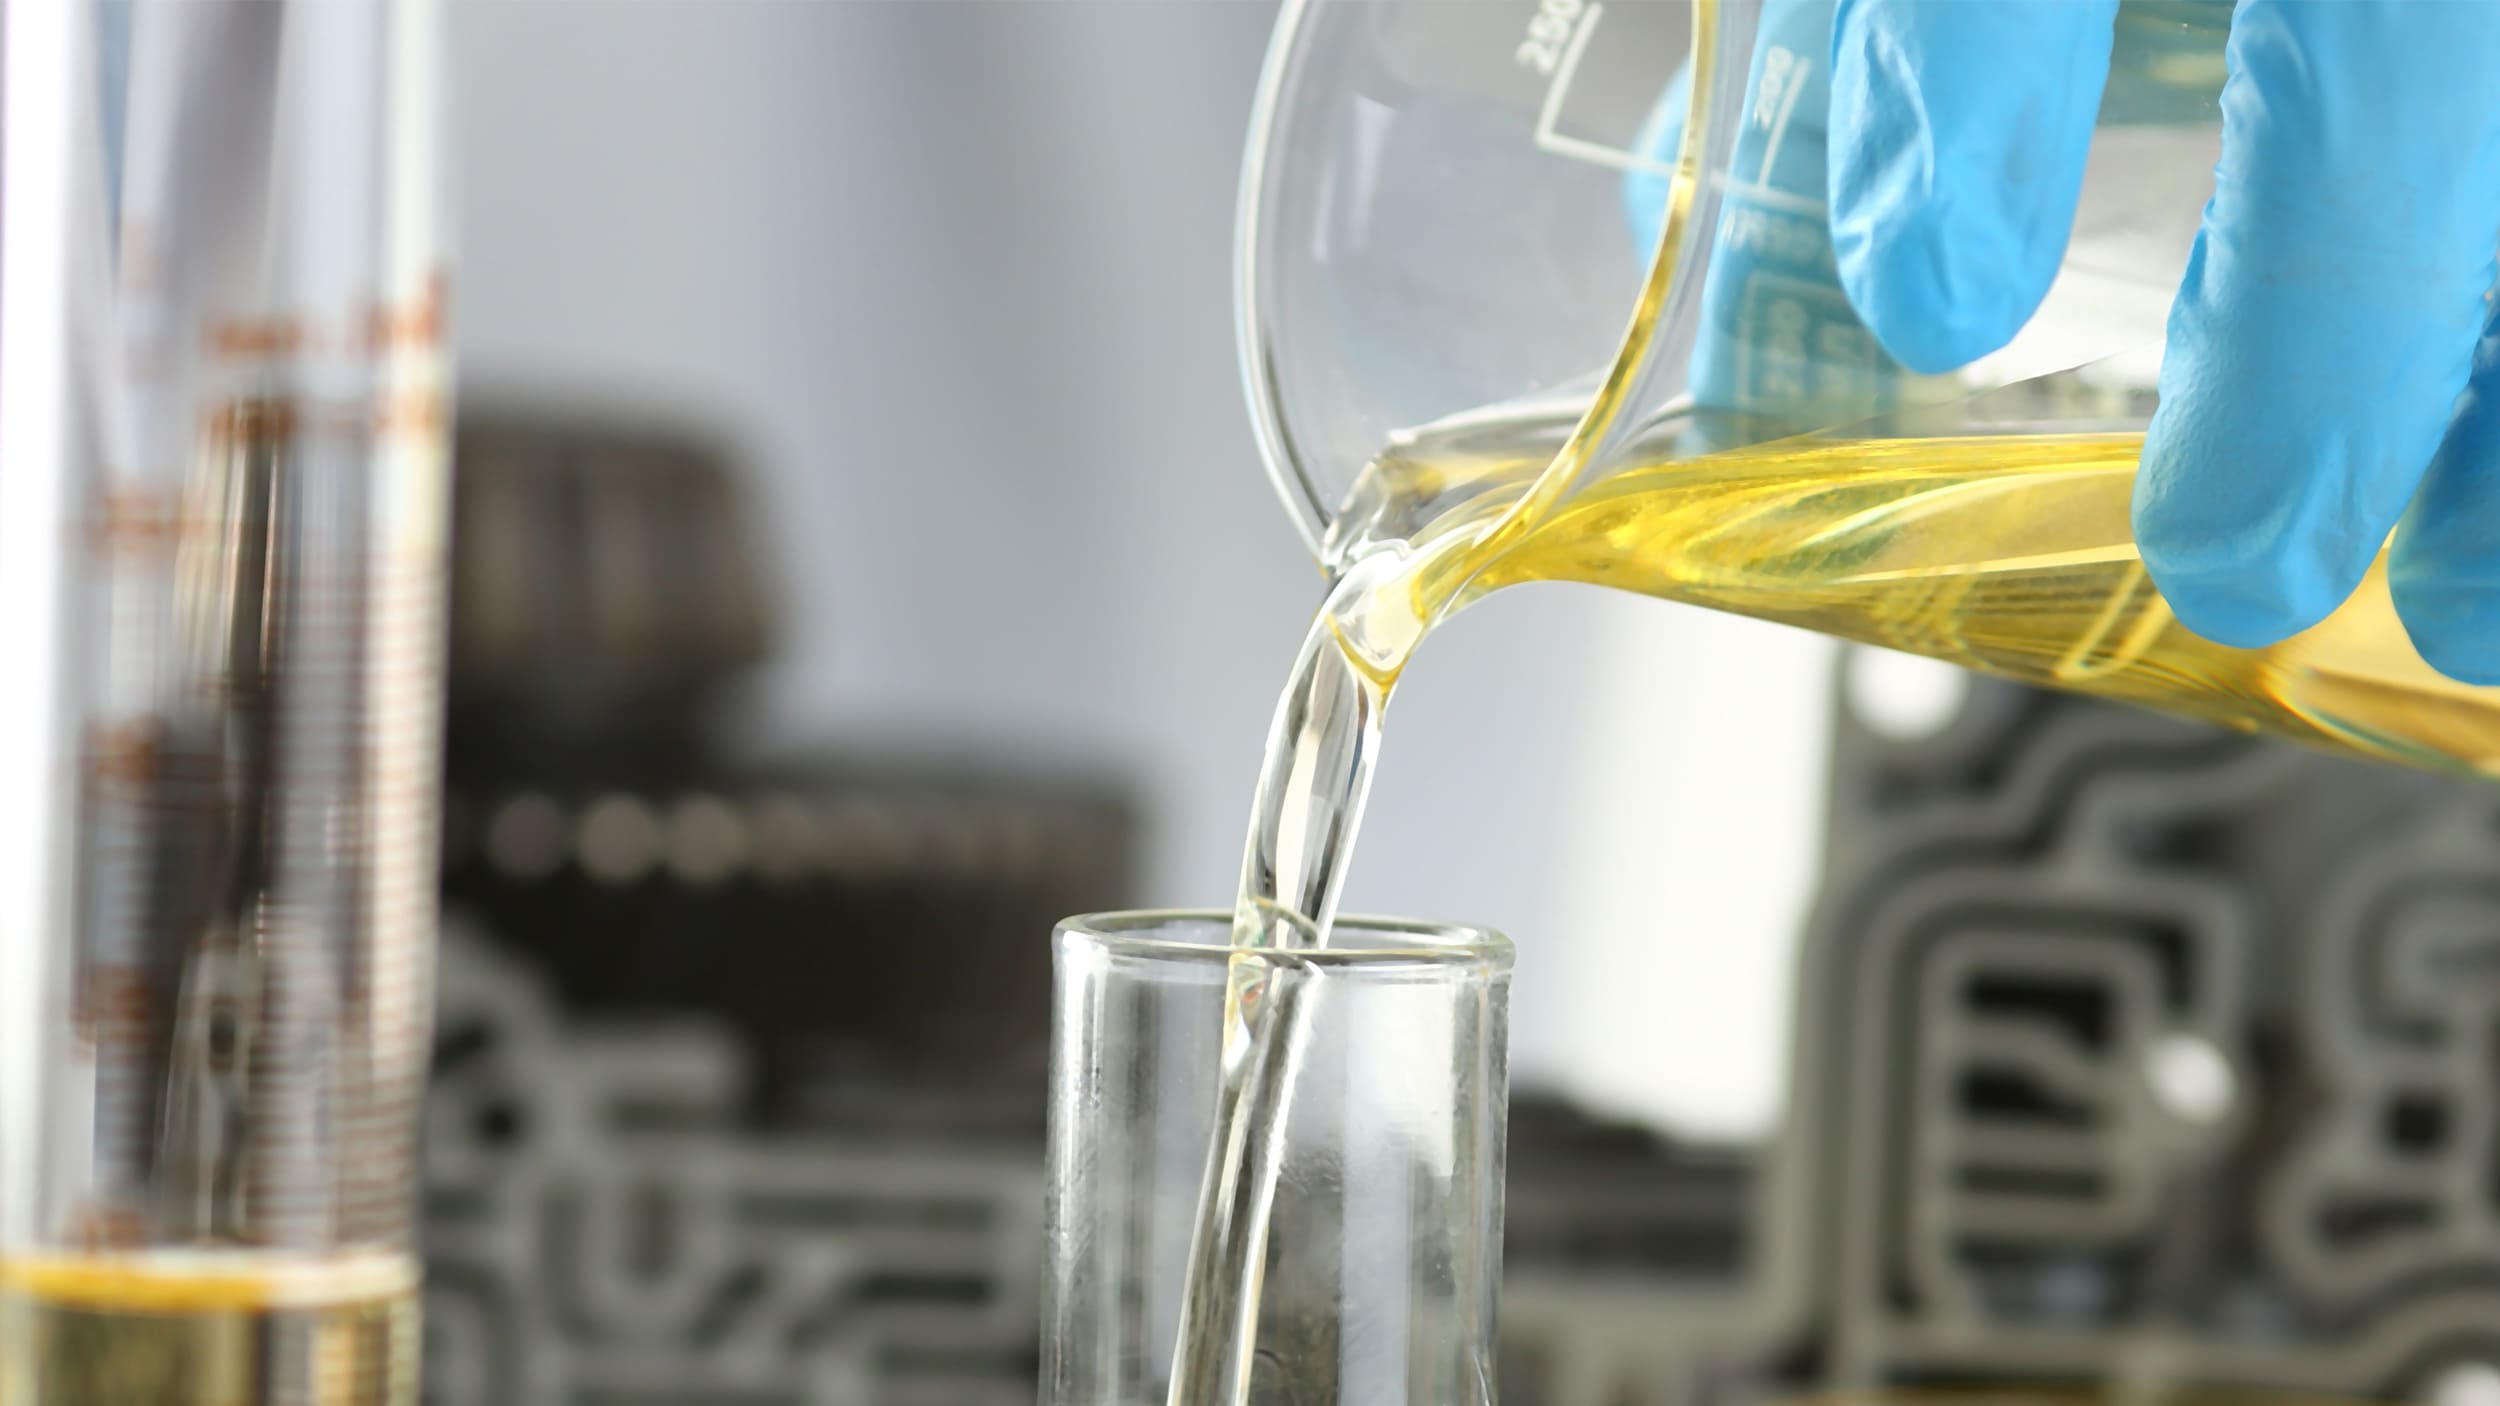 A blue gloved hand pours a yellow chemical into a glass from a beaker.